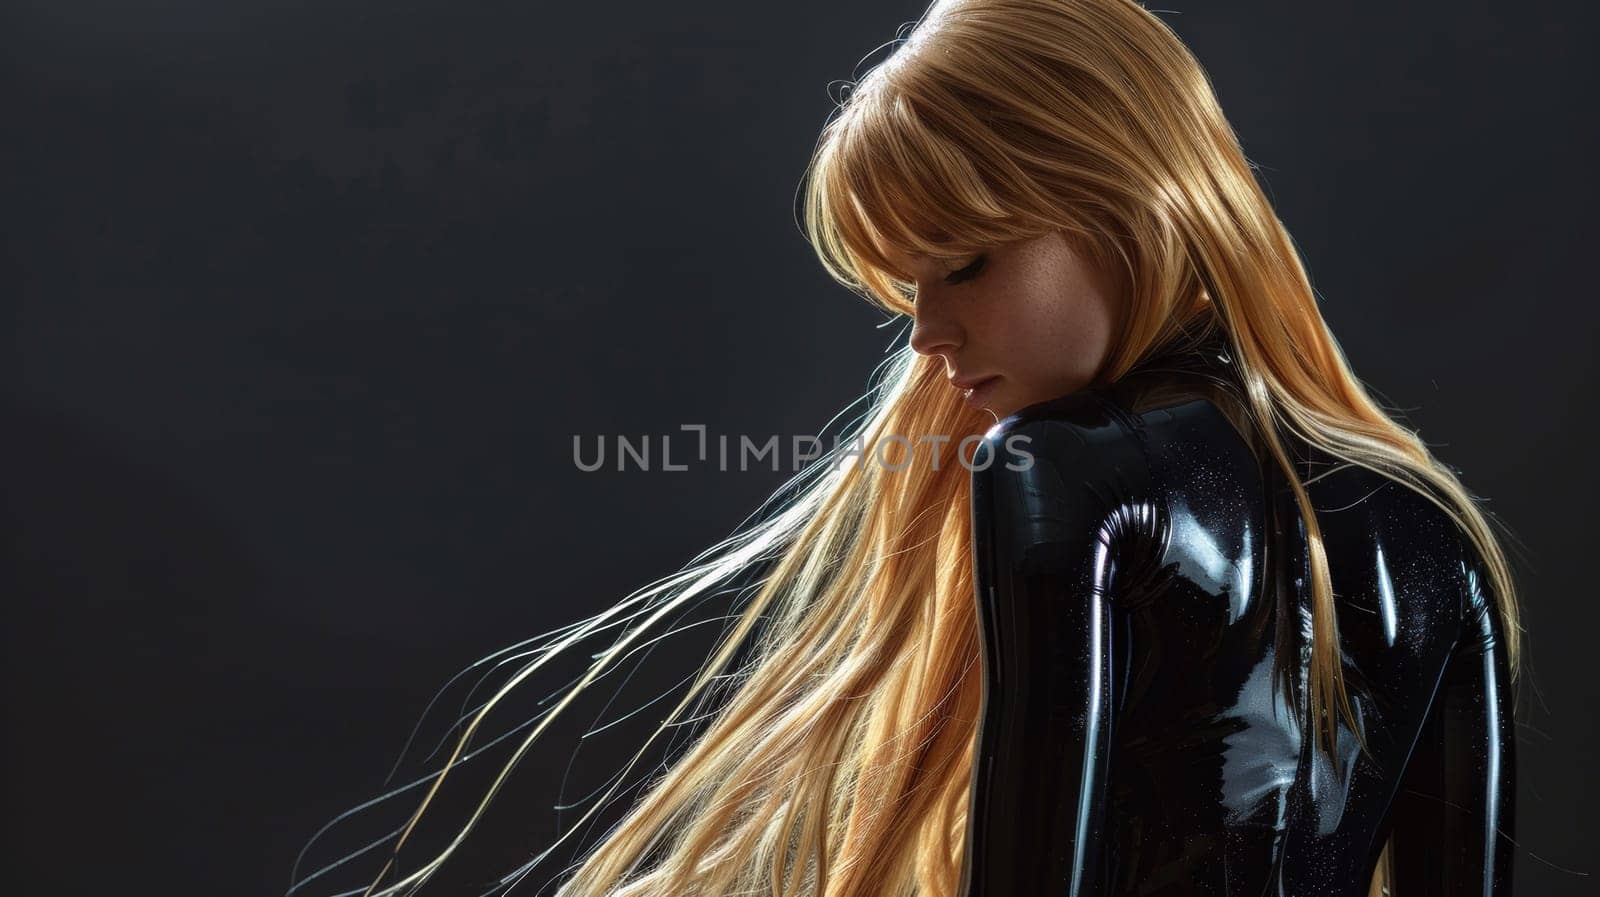 A woman with long blonde hair in a black latex suit